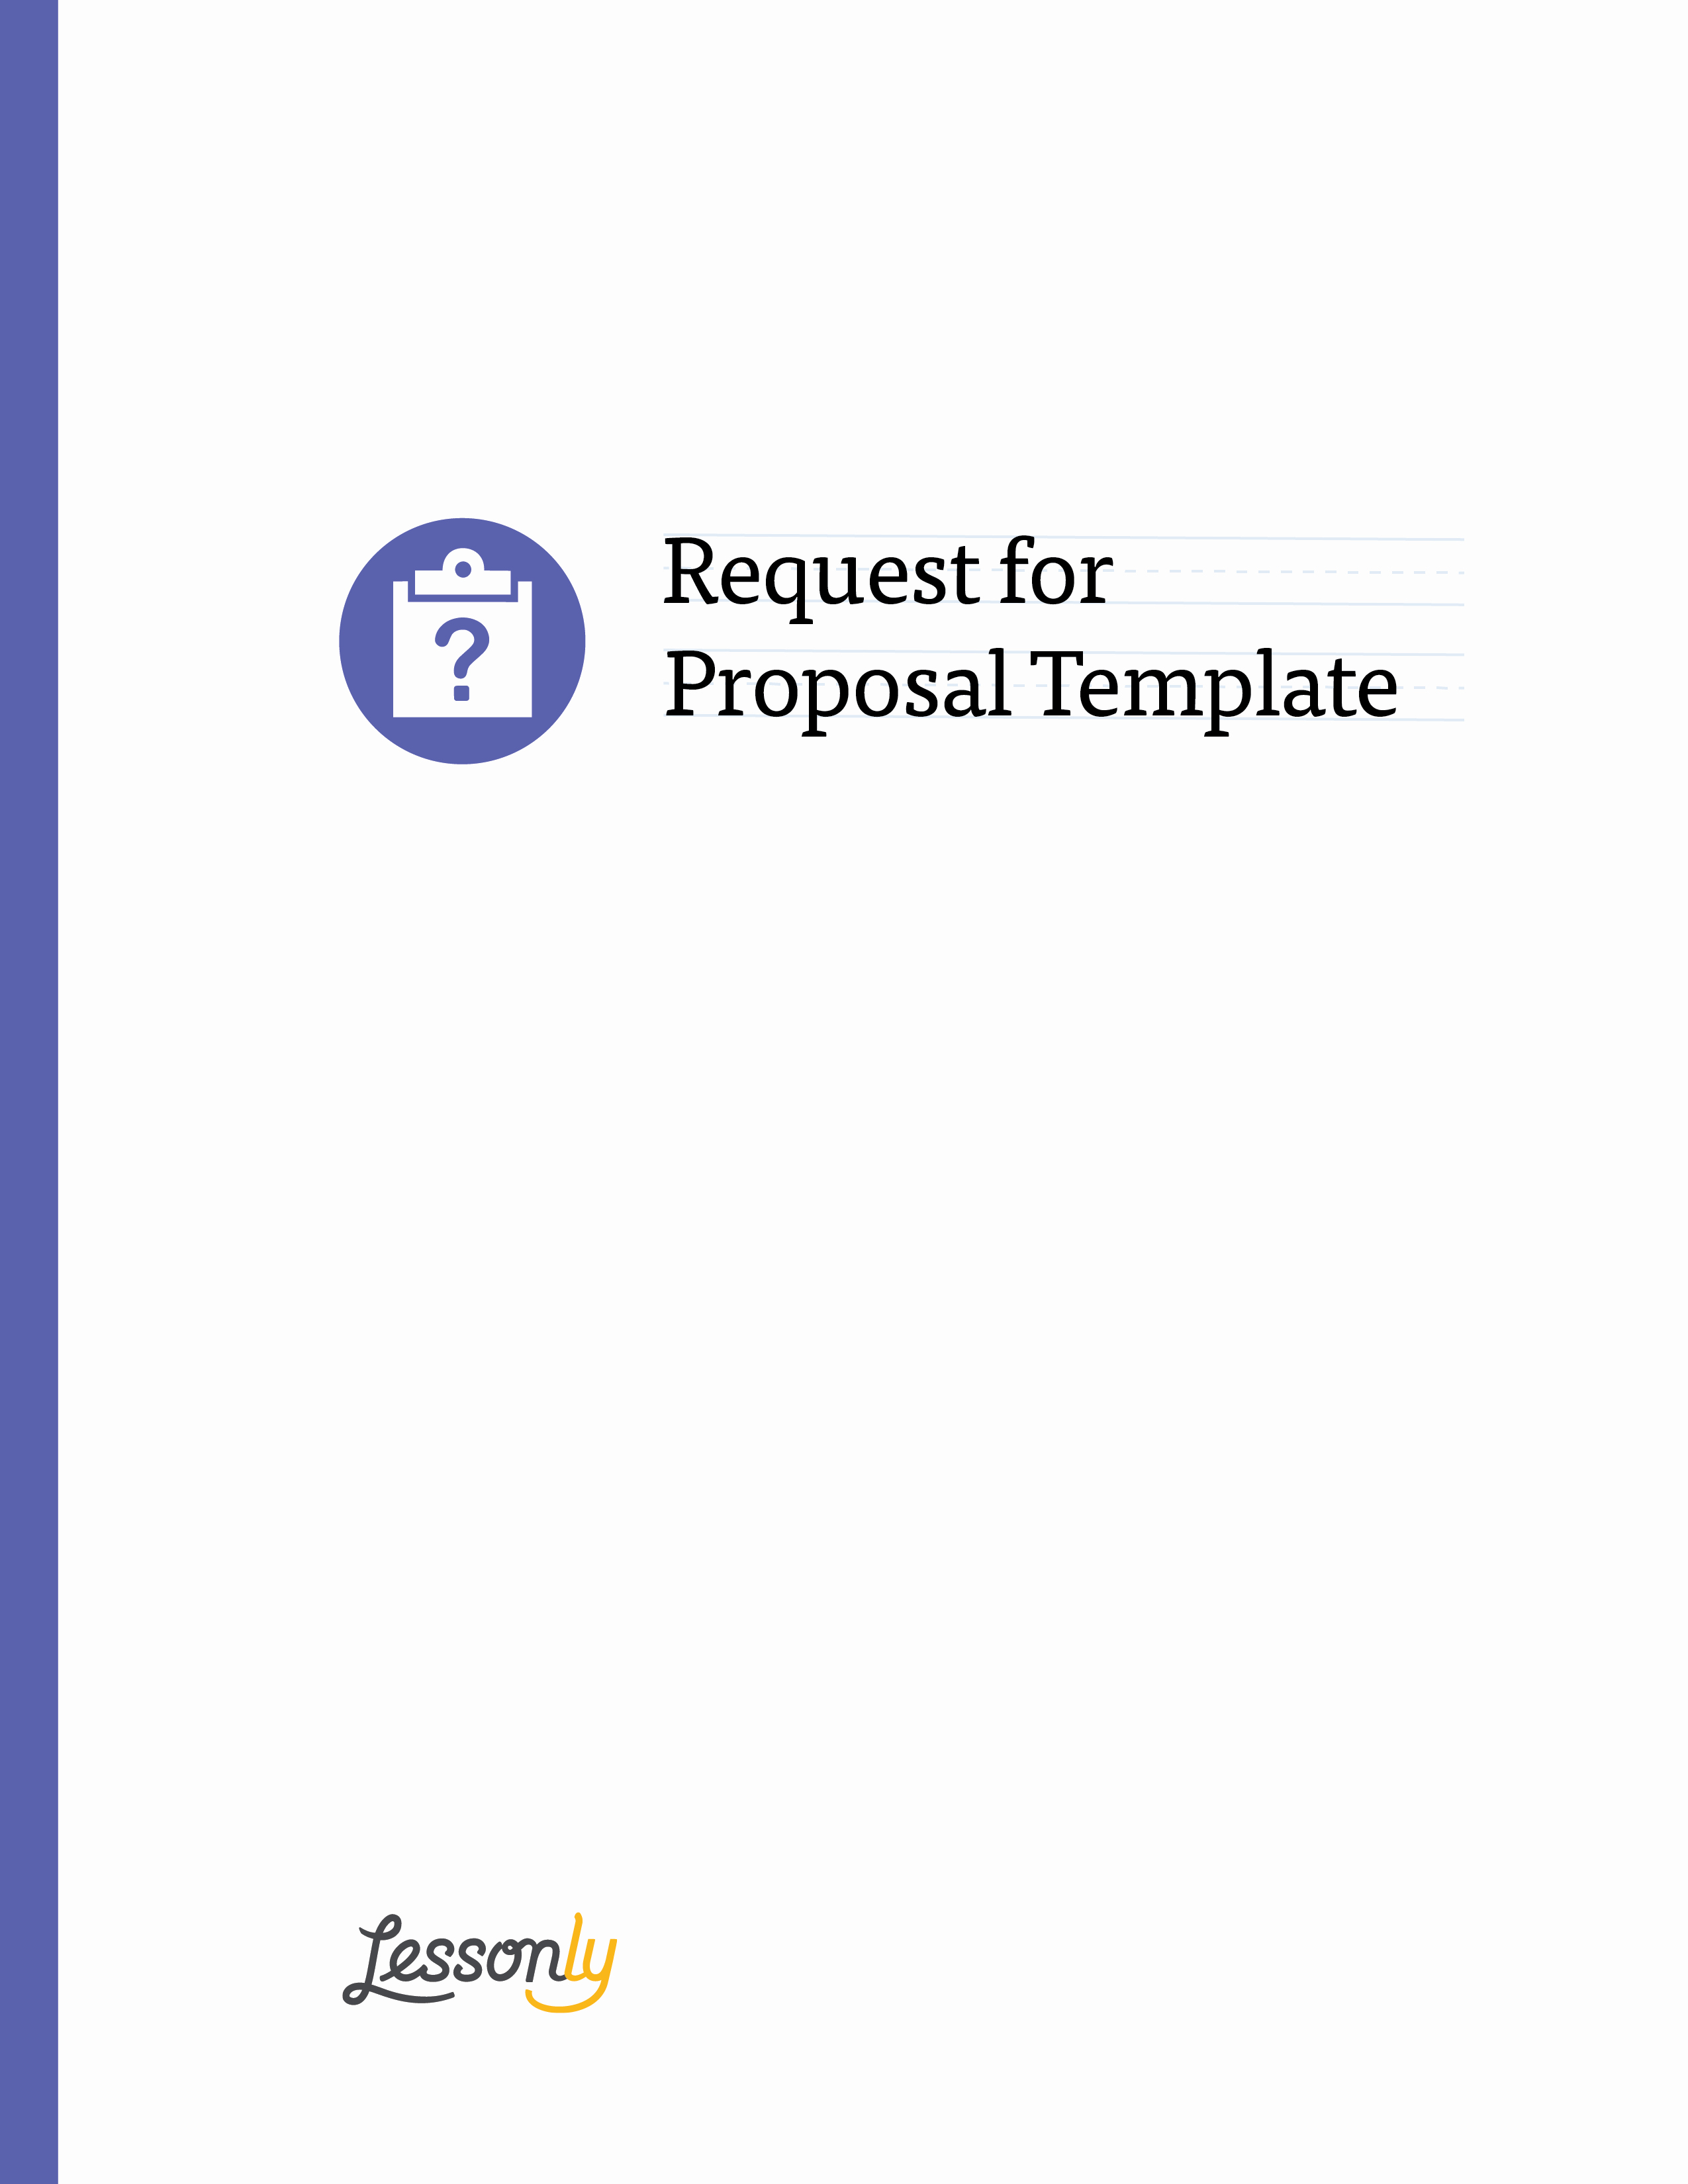 Free Lms Request for Proposal Template Lessonly